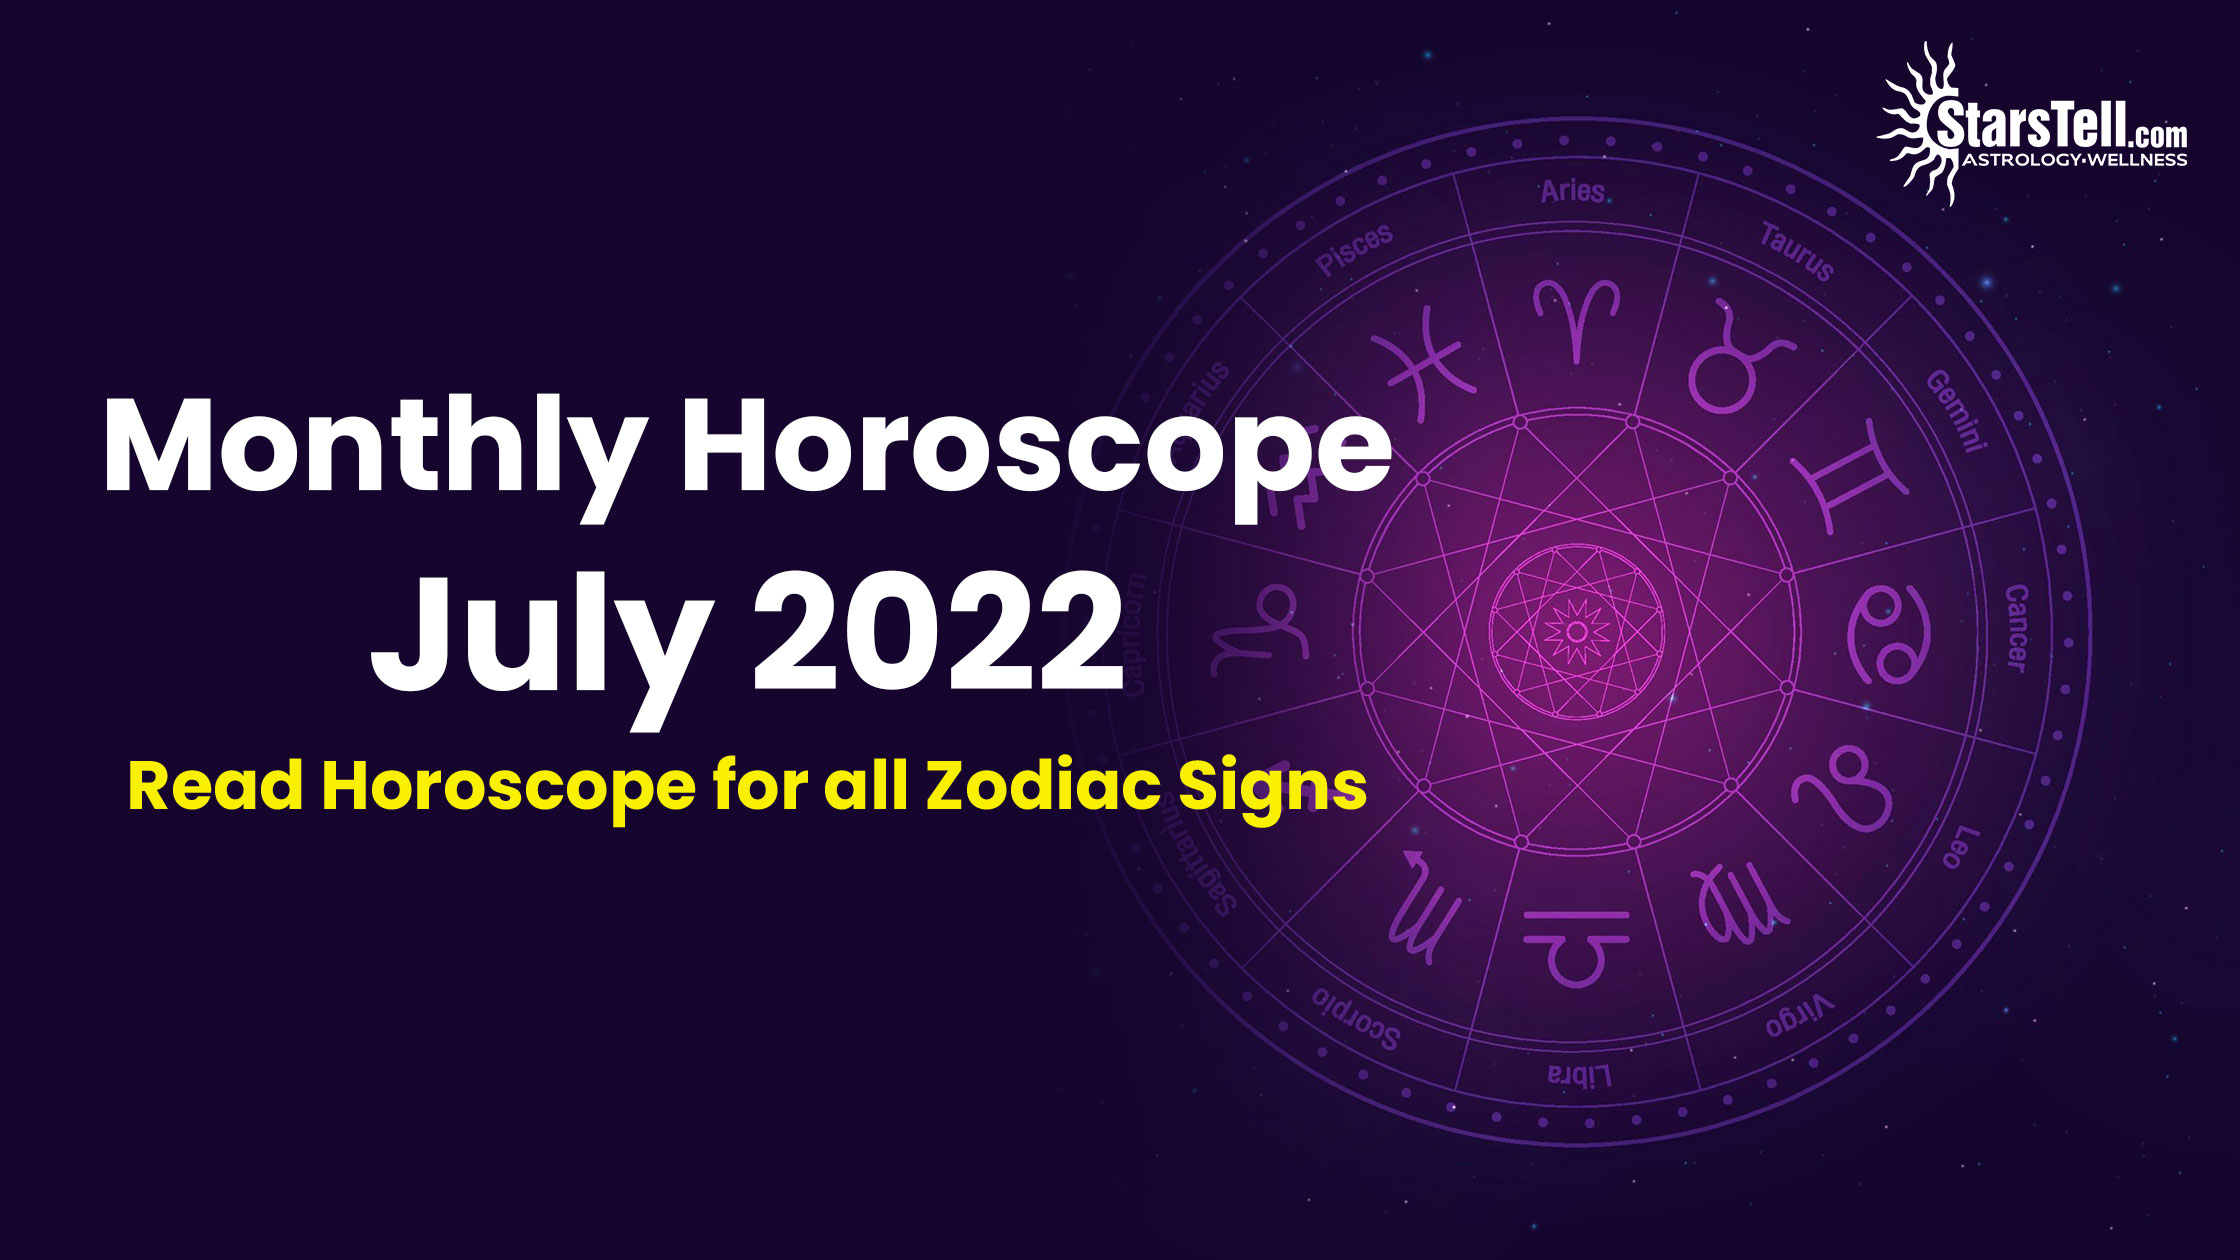 Monthly Horoscope July 2022 - Read Horoscope for all zodiac signs